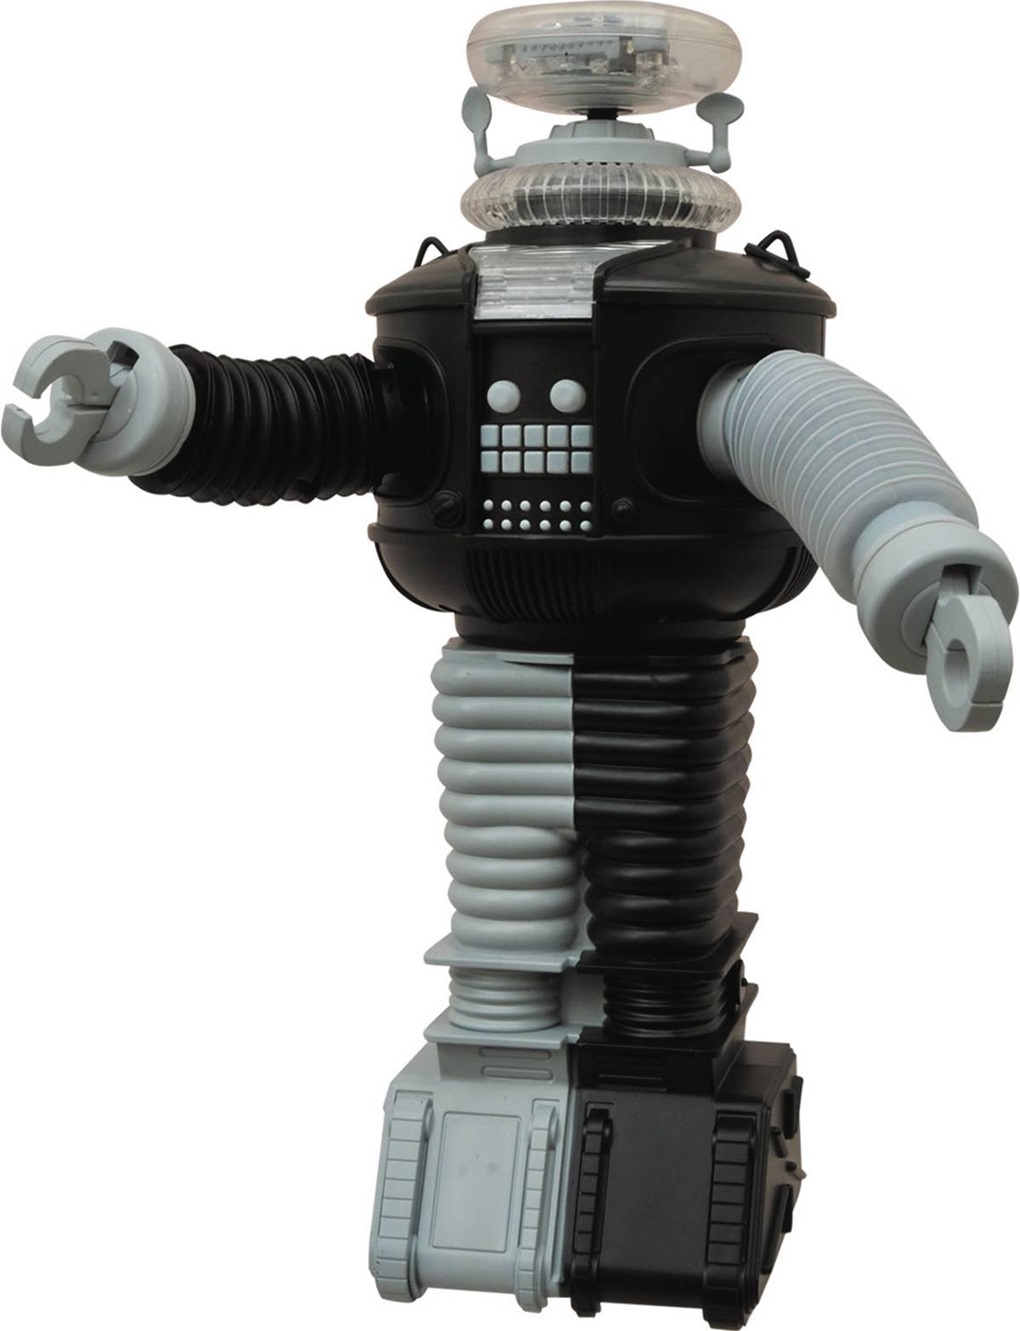 Lost in Space Anti-Matter B-9 Electronic Robot Plastic Model 